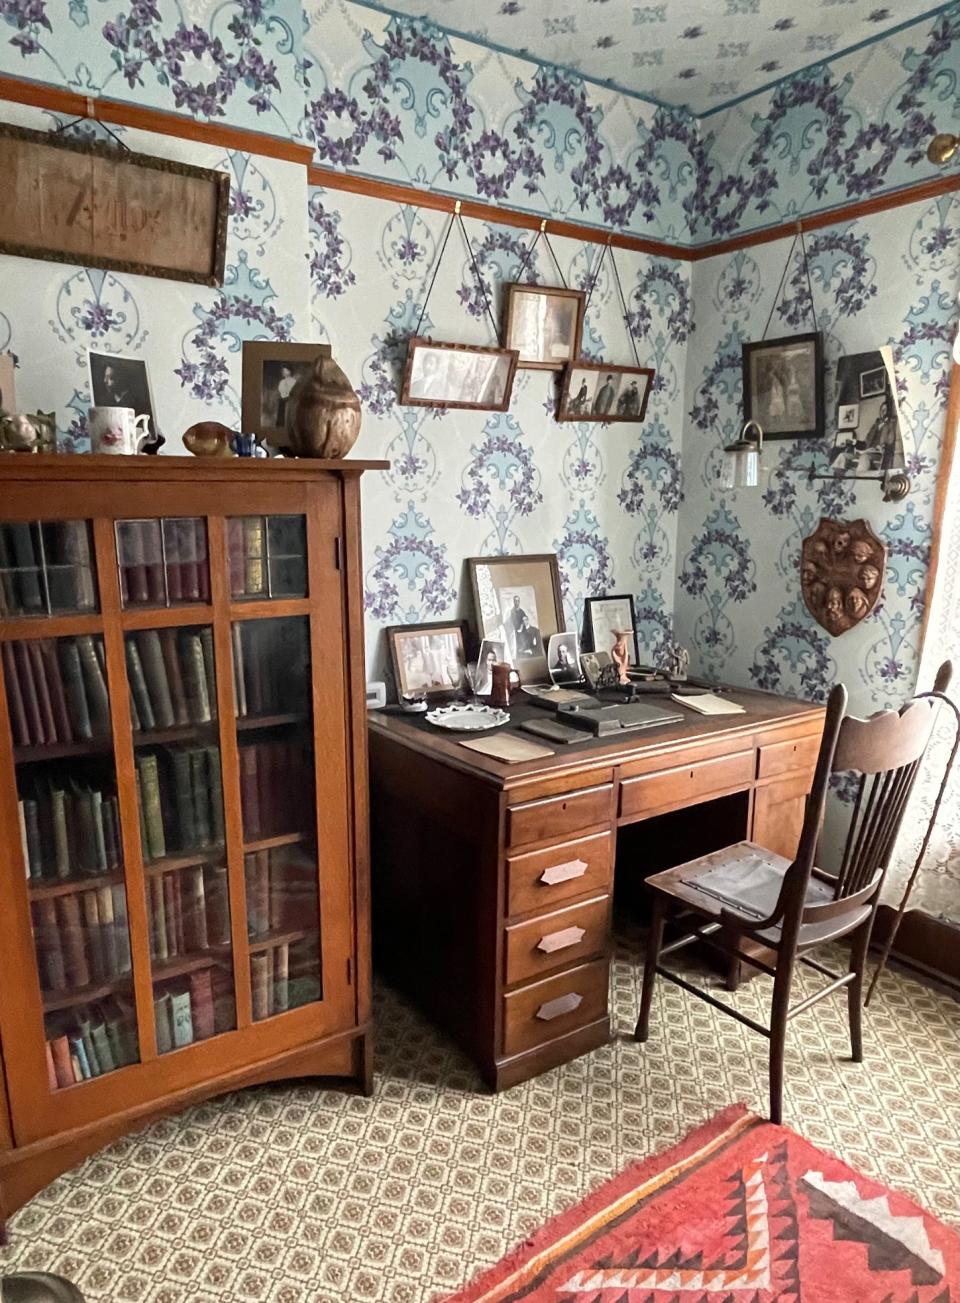 Visitors can see Dunbar's study, which was preserved by his mother after he died at age 33.